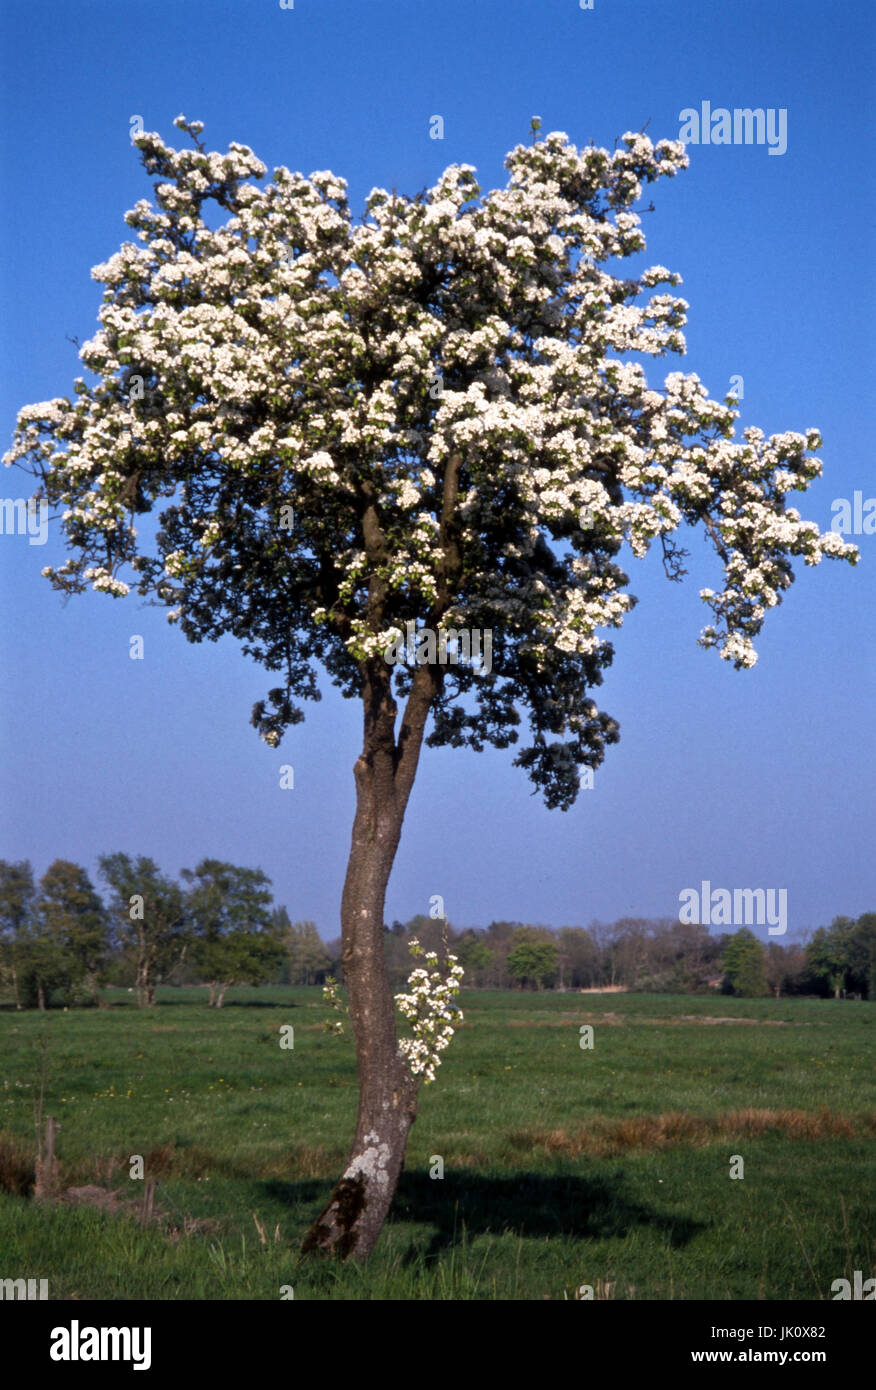 pear tree in full blossom on free field. pear-tree in full blossom in a meadow., birnbaum in voller bluete auf freiem feld. pear-tree in full blossom  Stock Photo